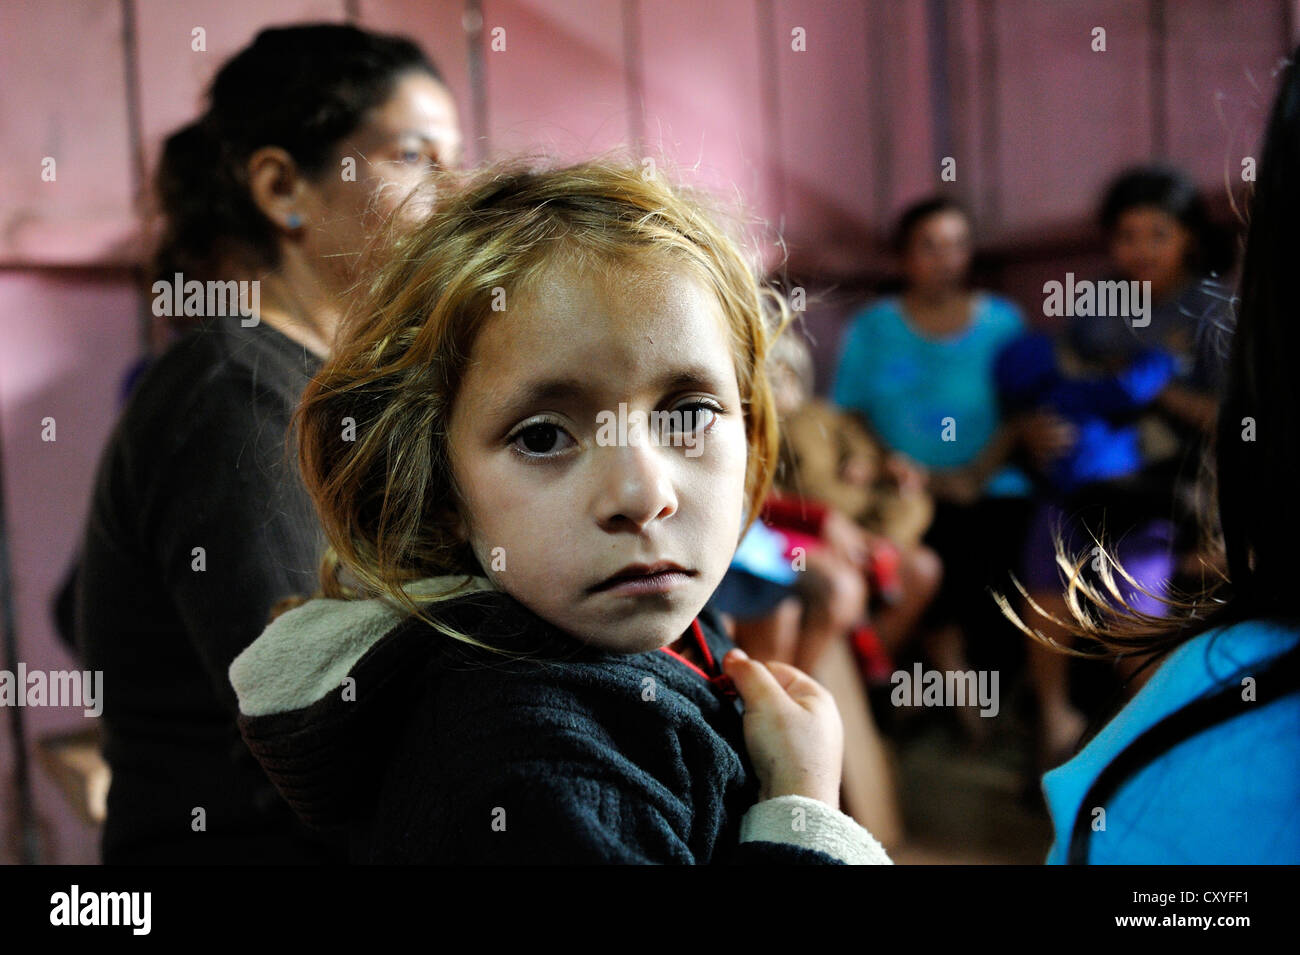 Girl during a meeting of an aid organisation that provides health services and information for mothers and children, portrait Stock Photo